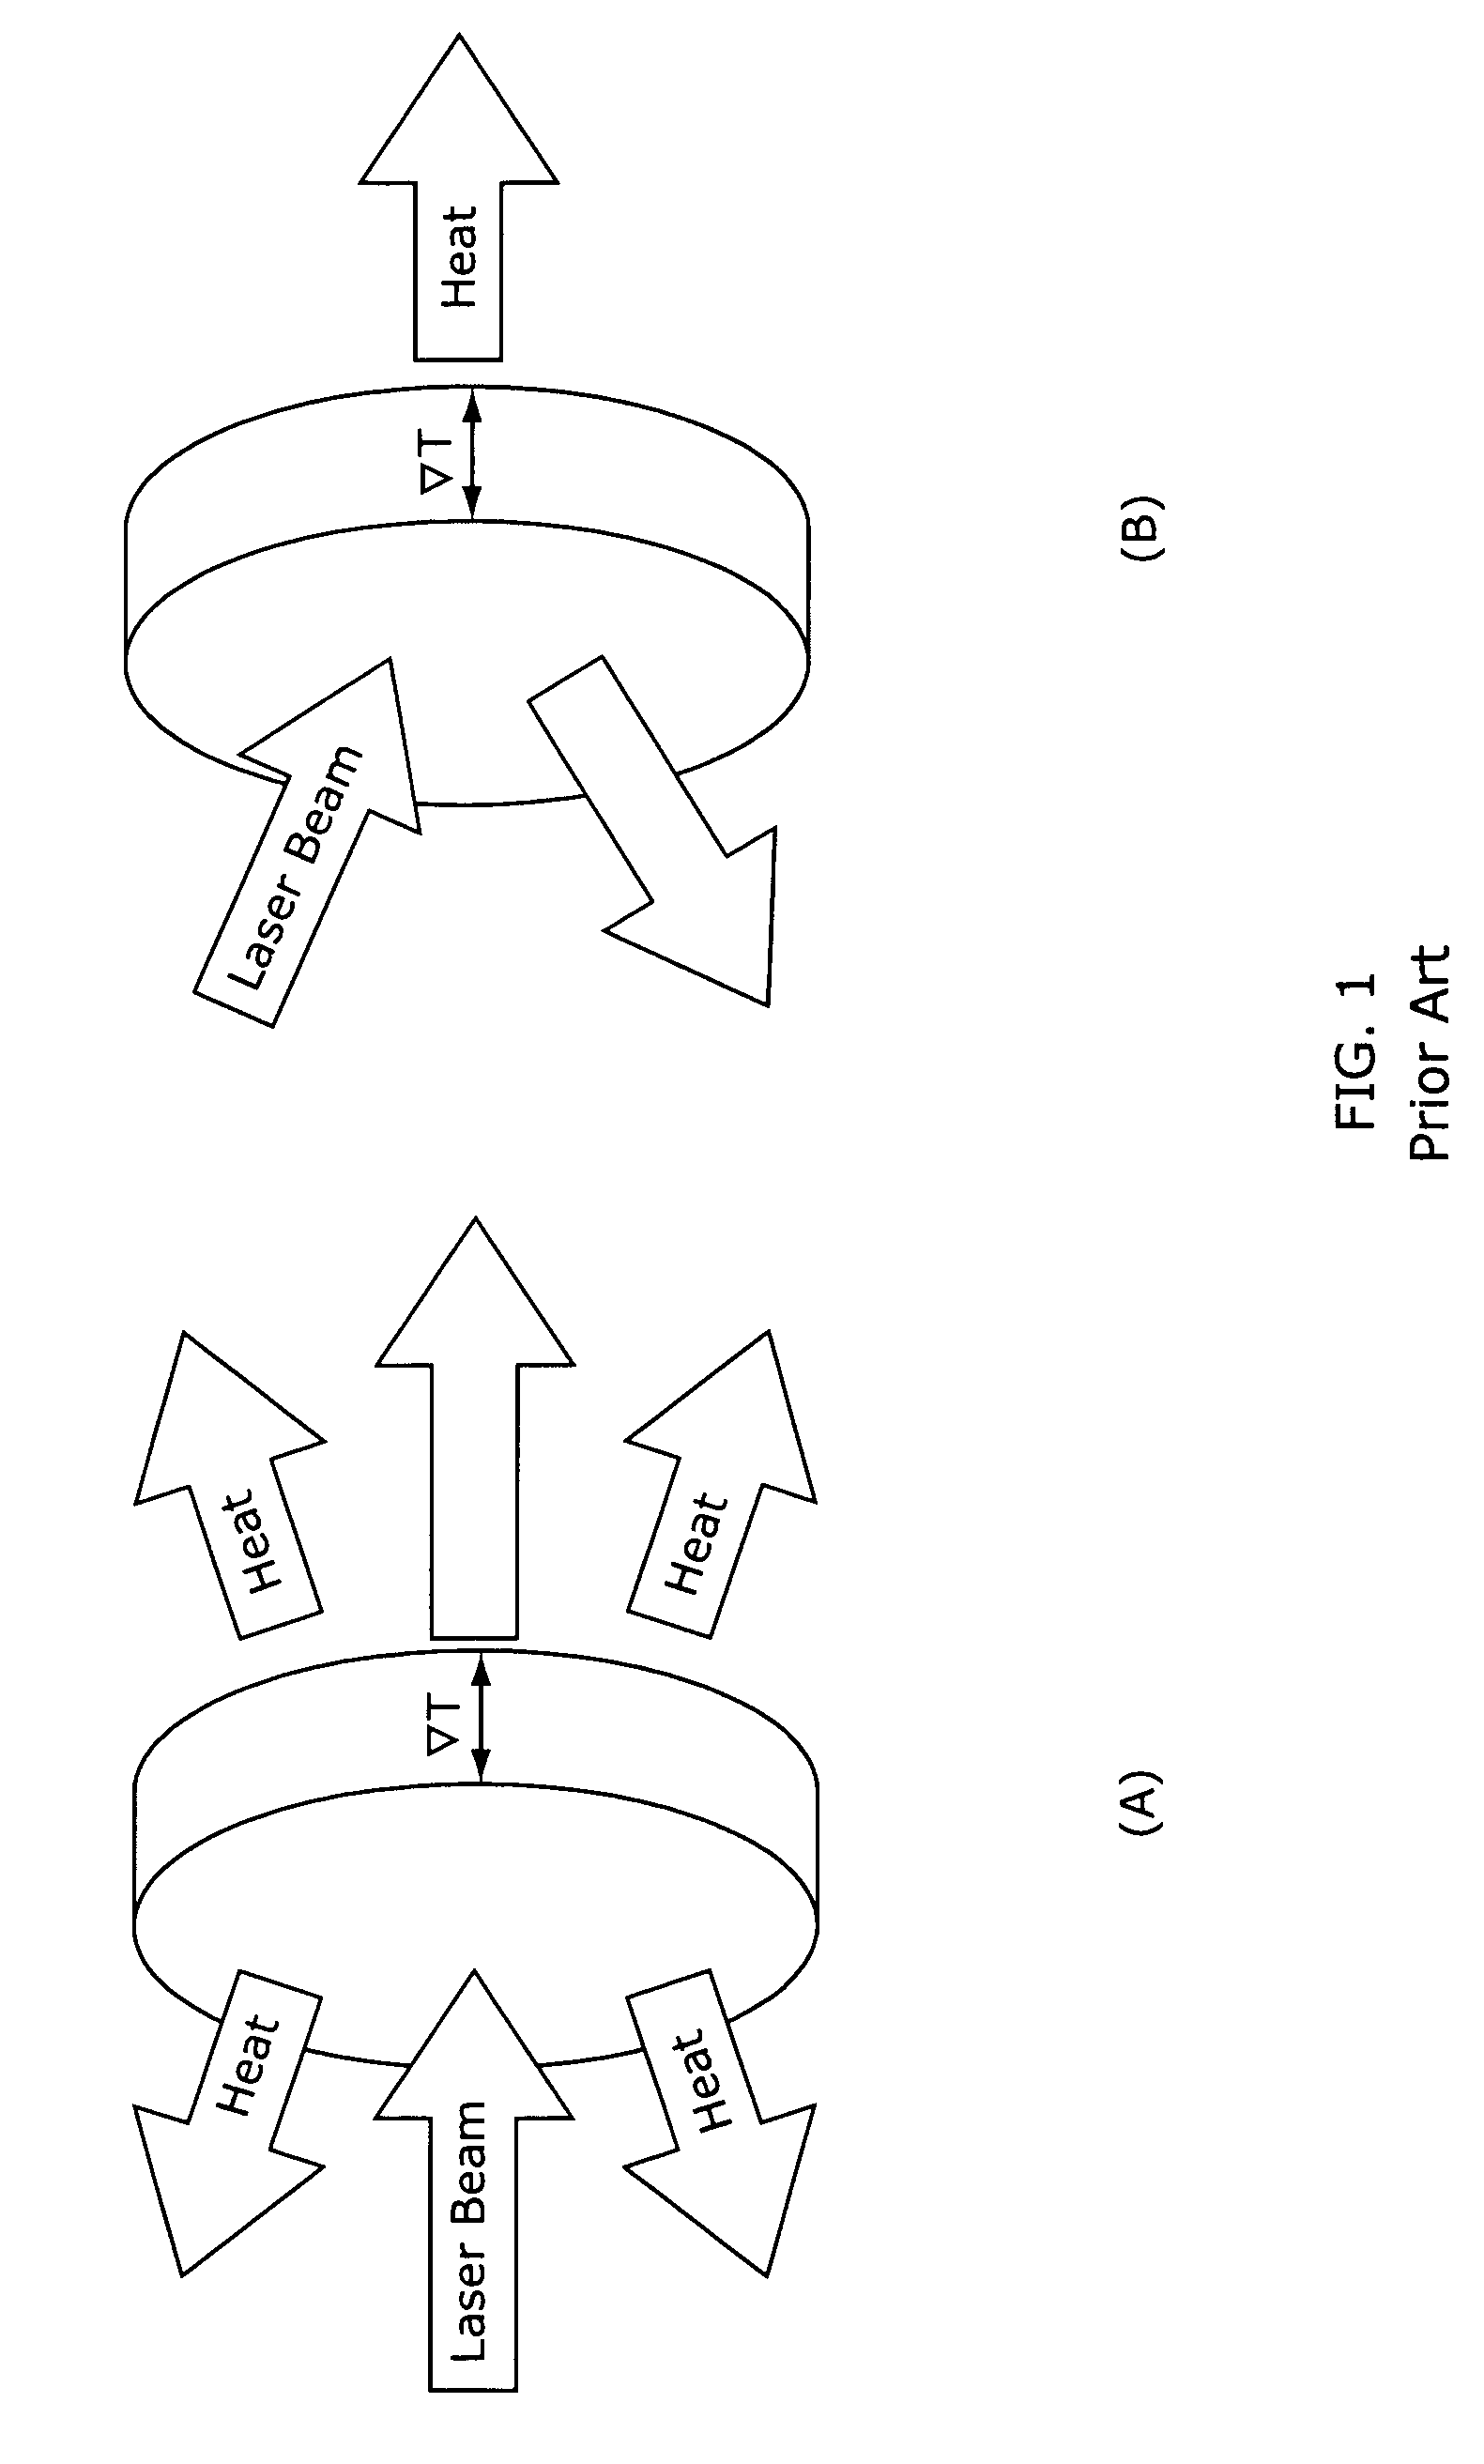 Diode-pumped solid state disk laser and method for producing uniform laser gain